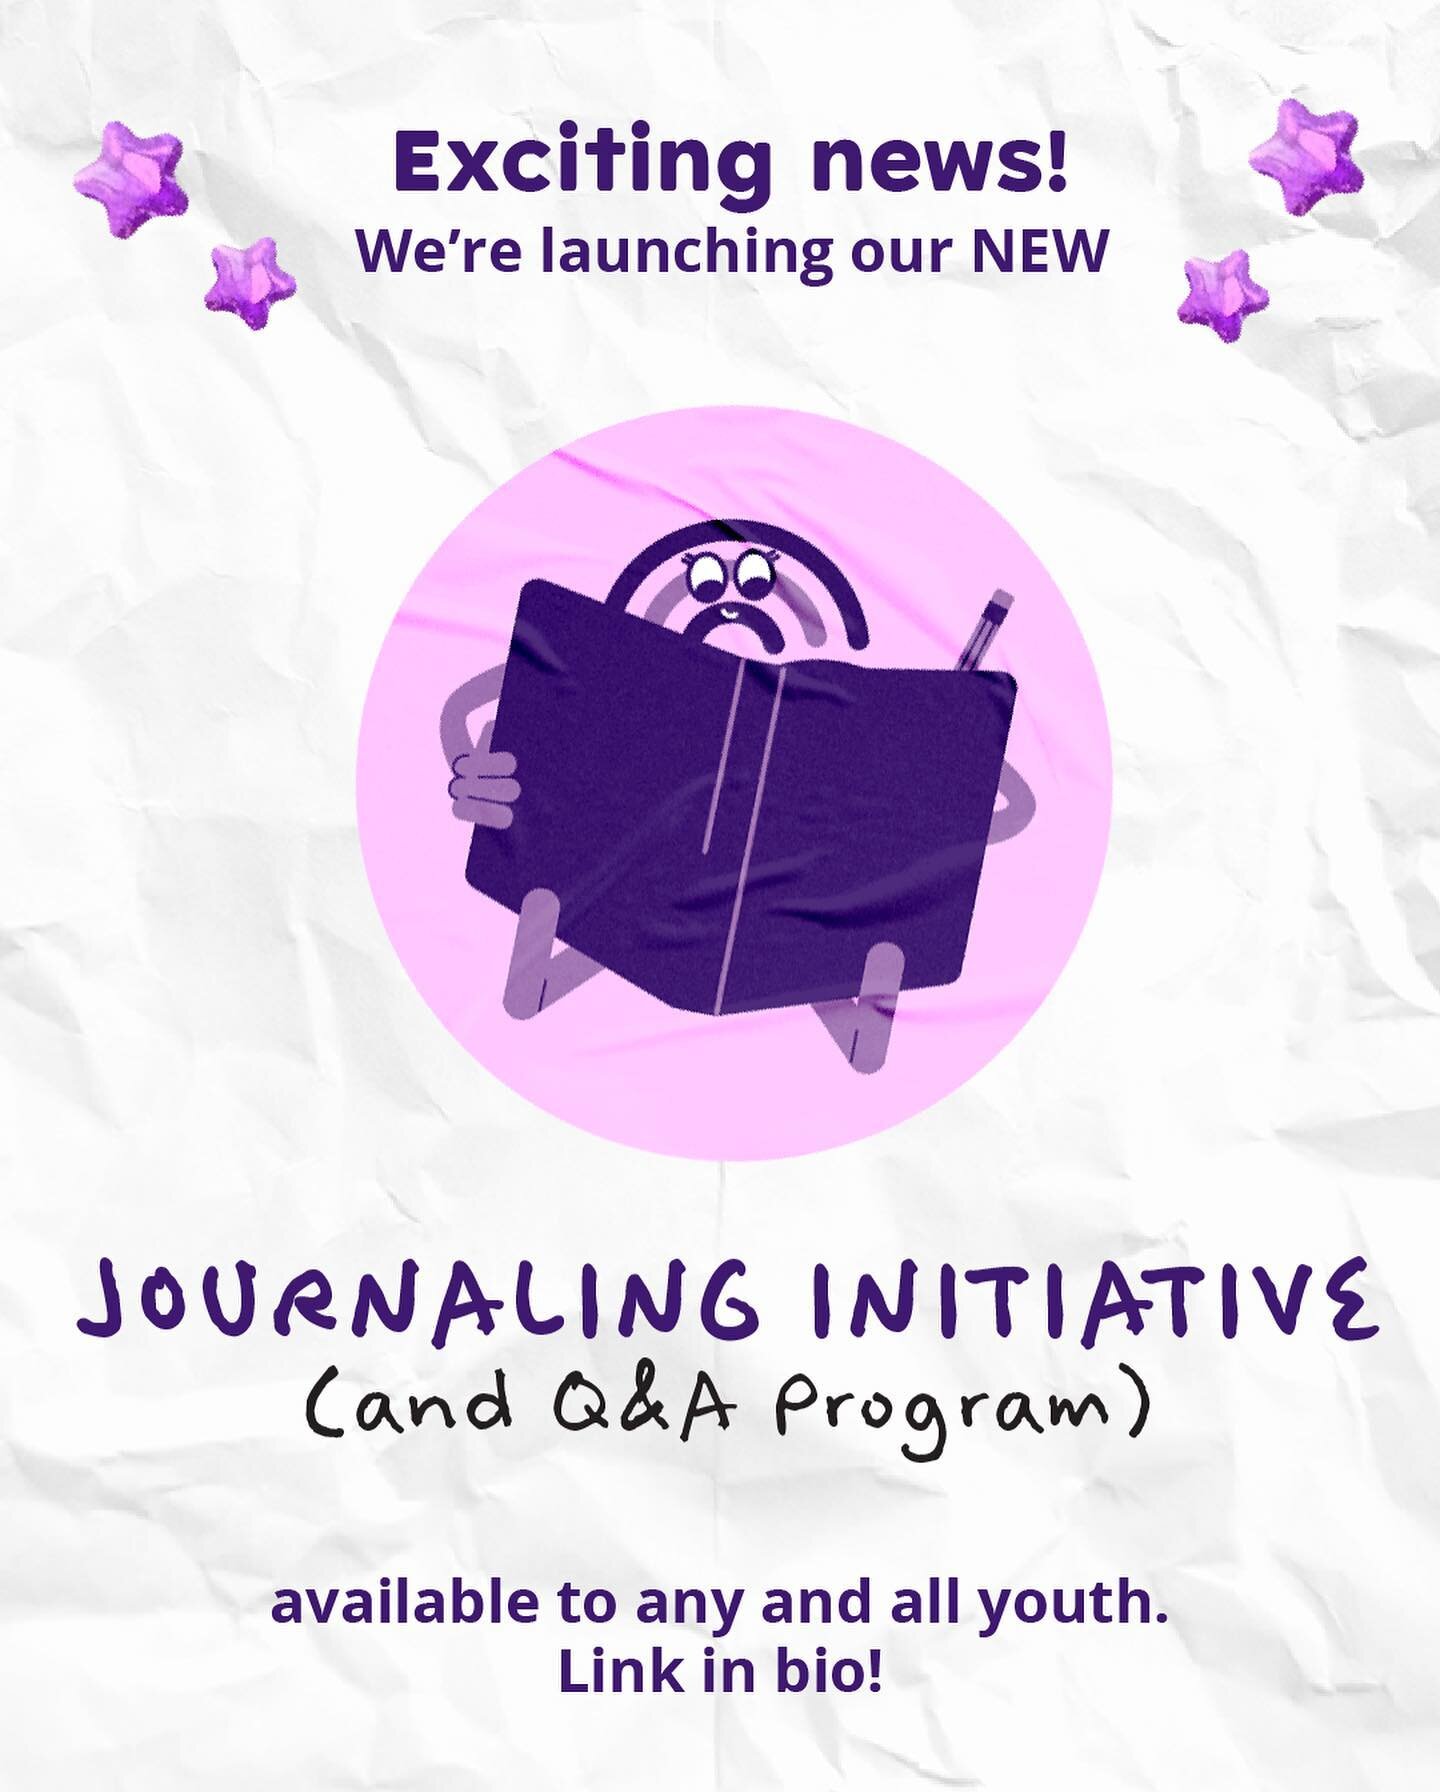 We're launching our journaling initiative and Q&amp;A program on our website! Read the slides or visit our website for more info.
#journalinginitiative #willowyouthnetwork 

. 
.

[Image Description: A series of graphics with a crumpled paper backgro